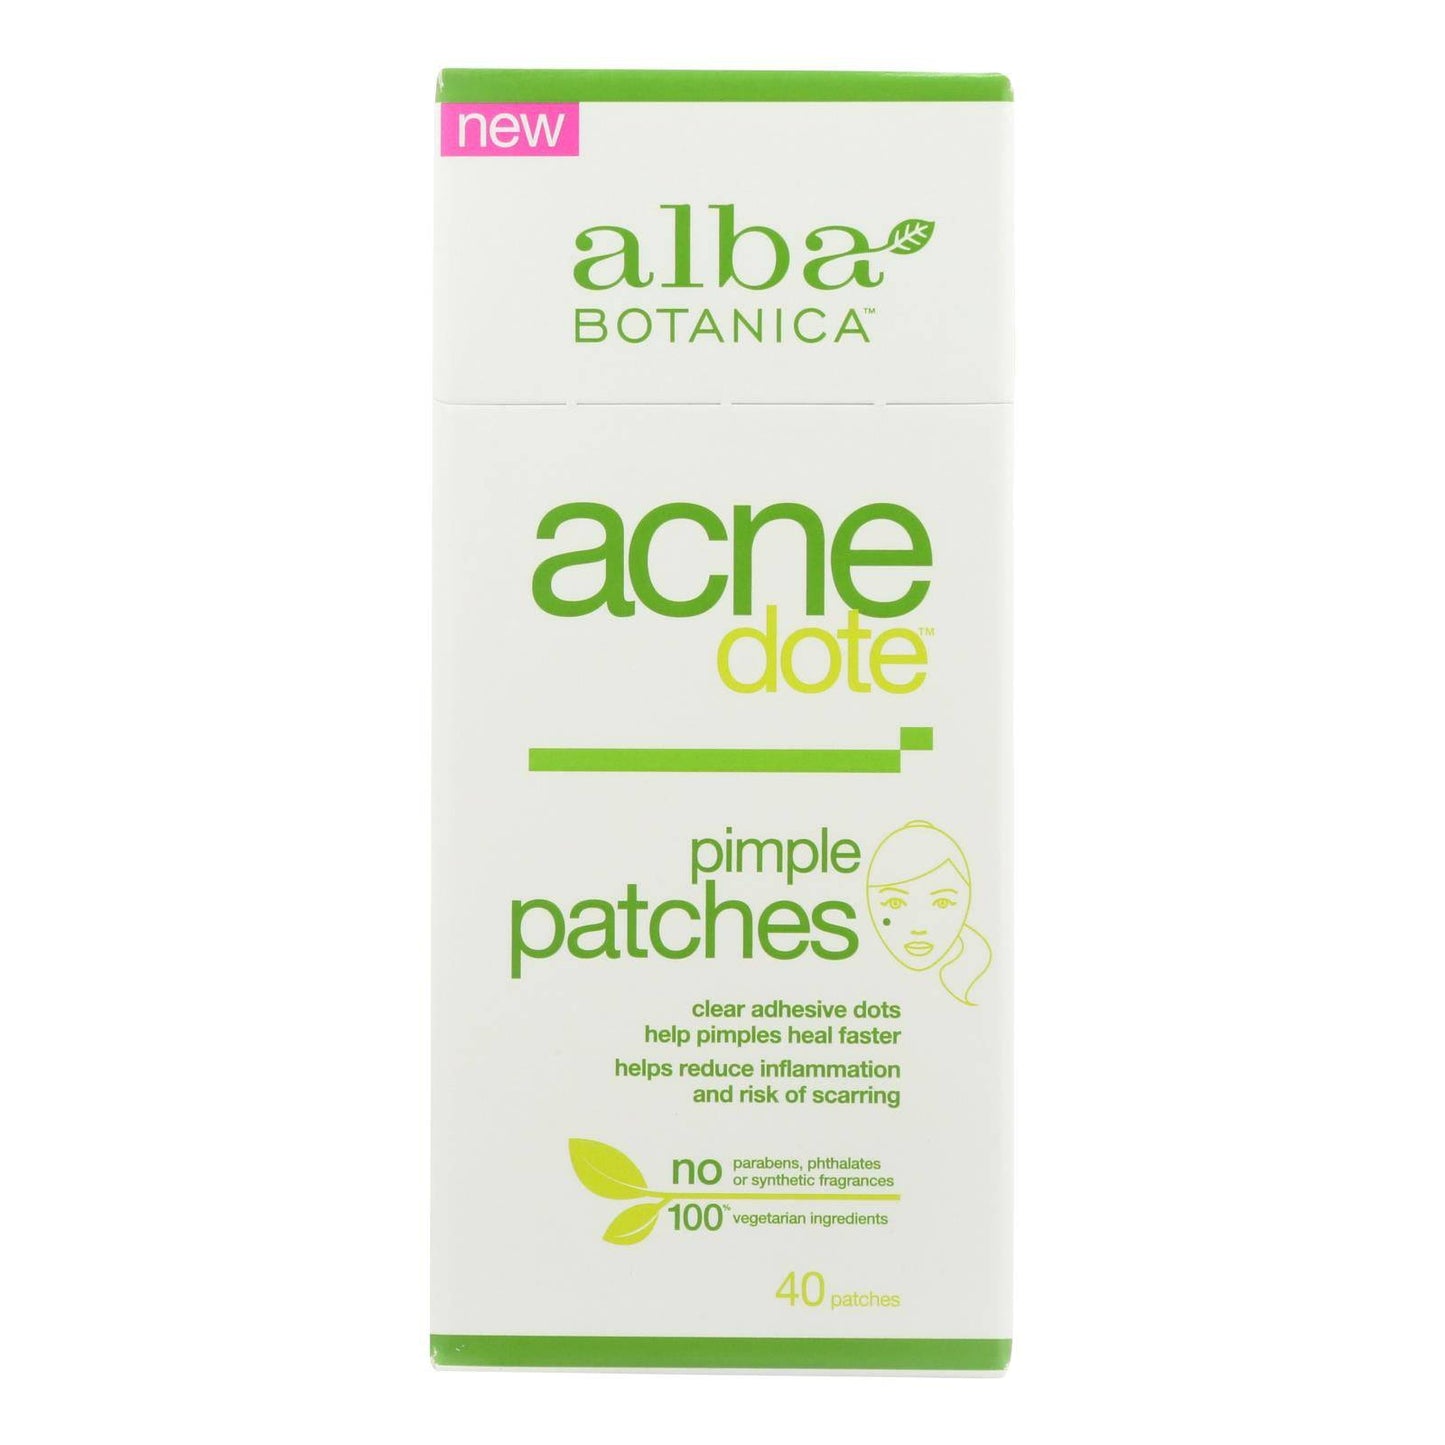 Alba Botanica - Acnedote Pimple Patches - 40 Count | OnlyNaturals.us